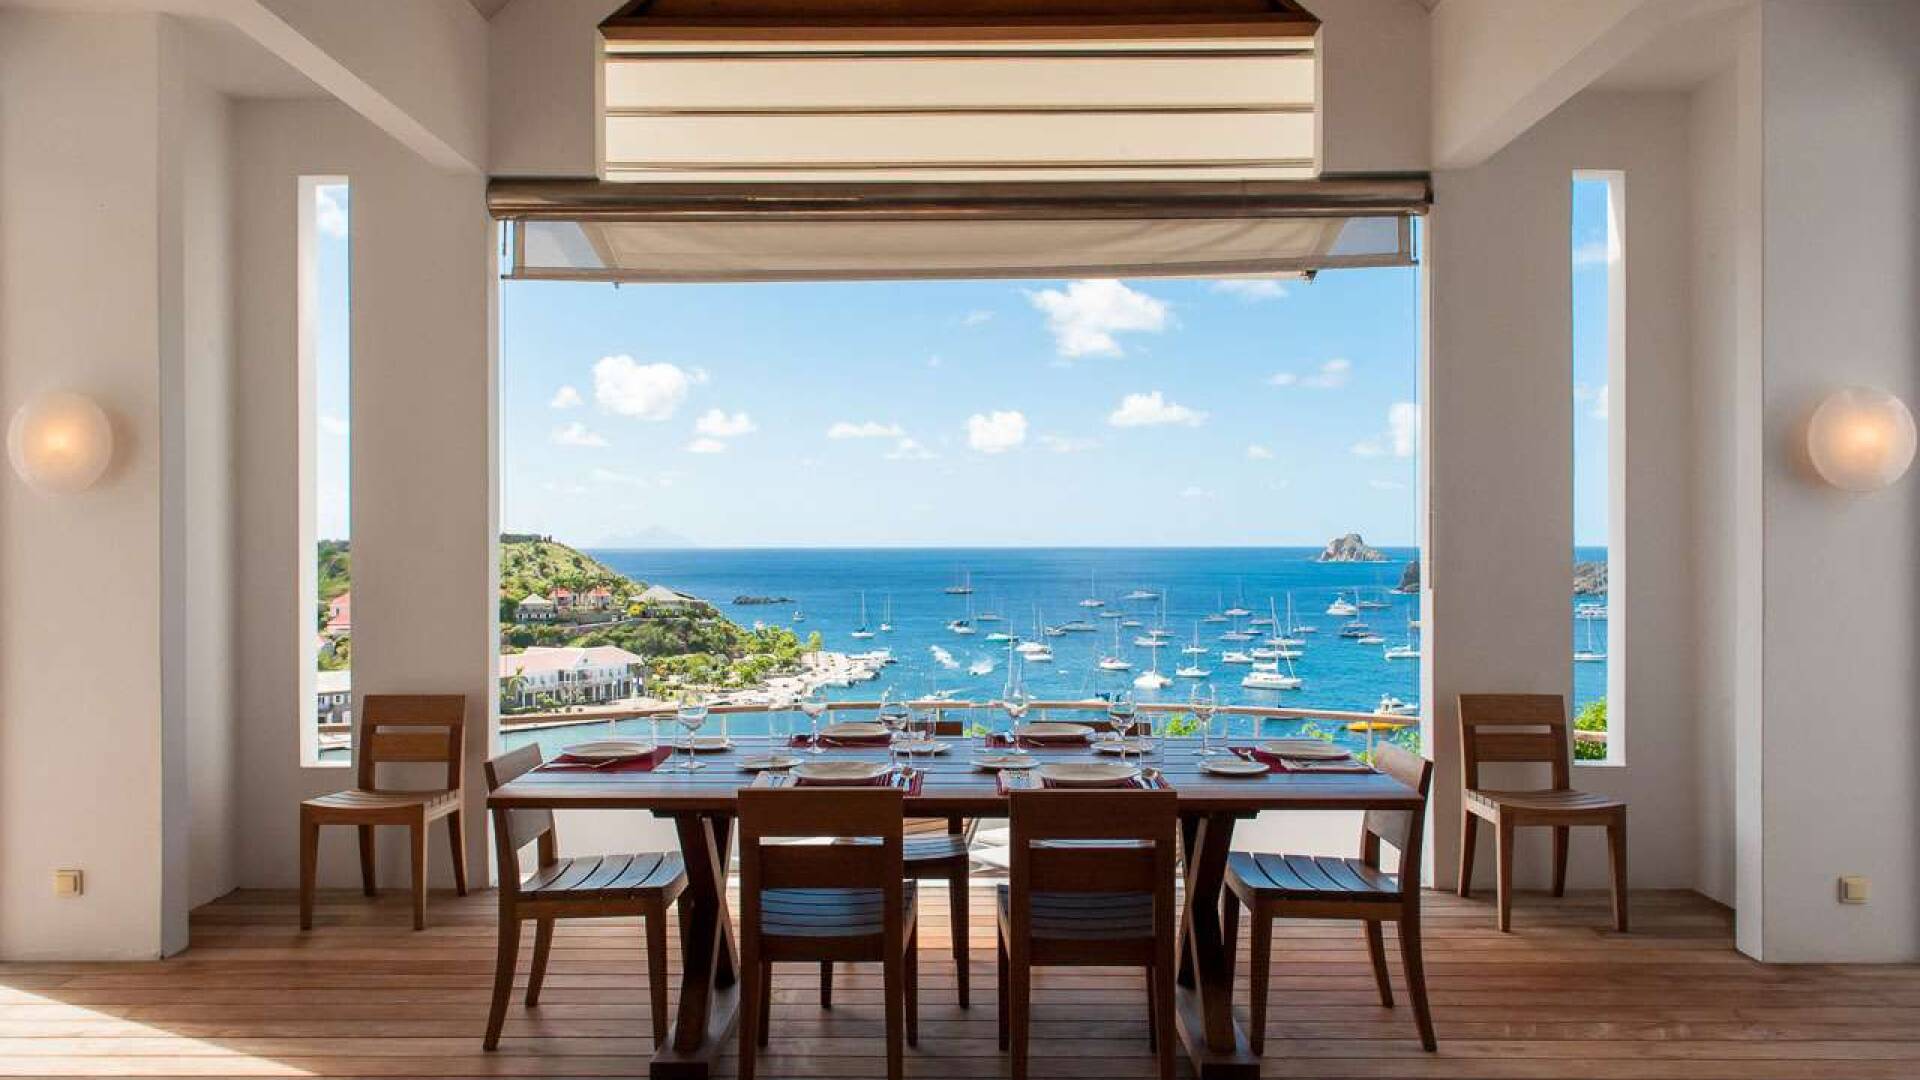 Dining Room at WV LAM, Gustavia, St. Barthelemy